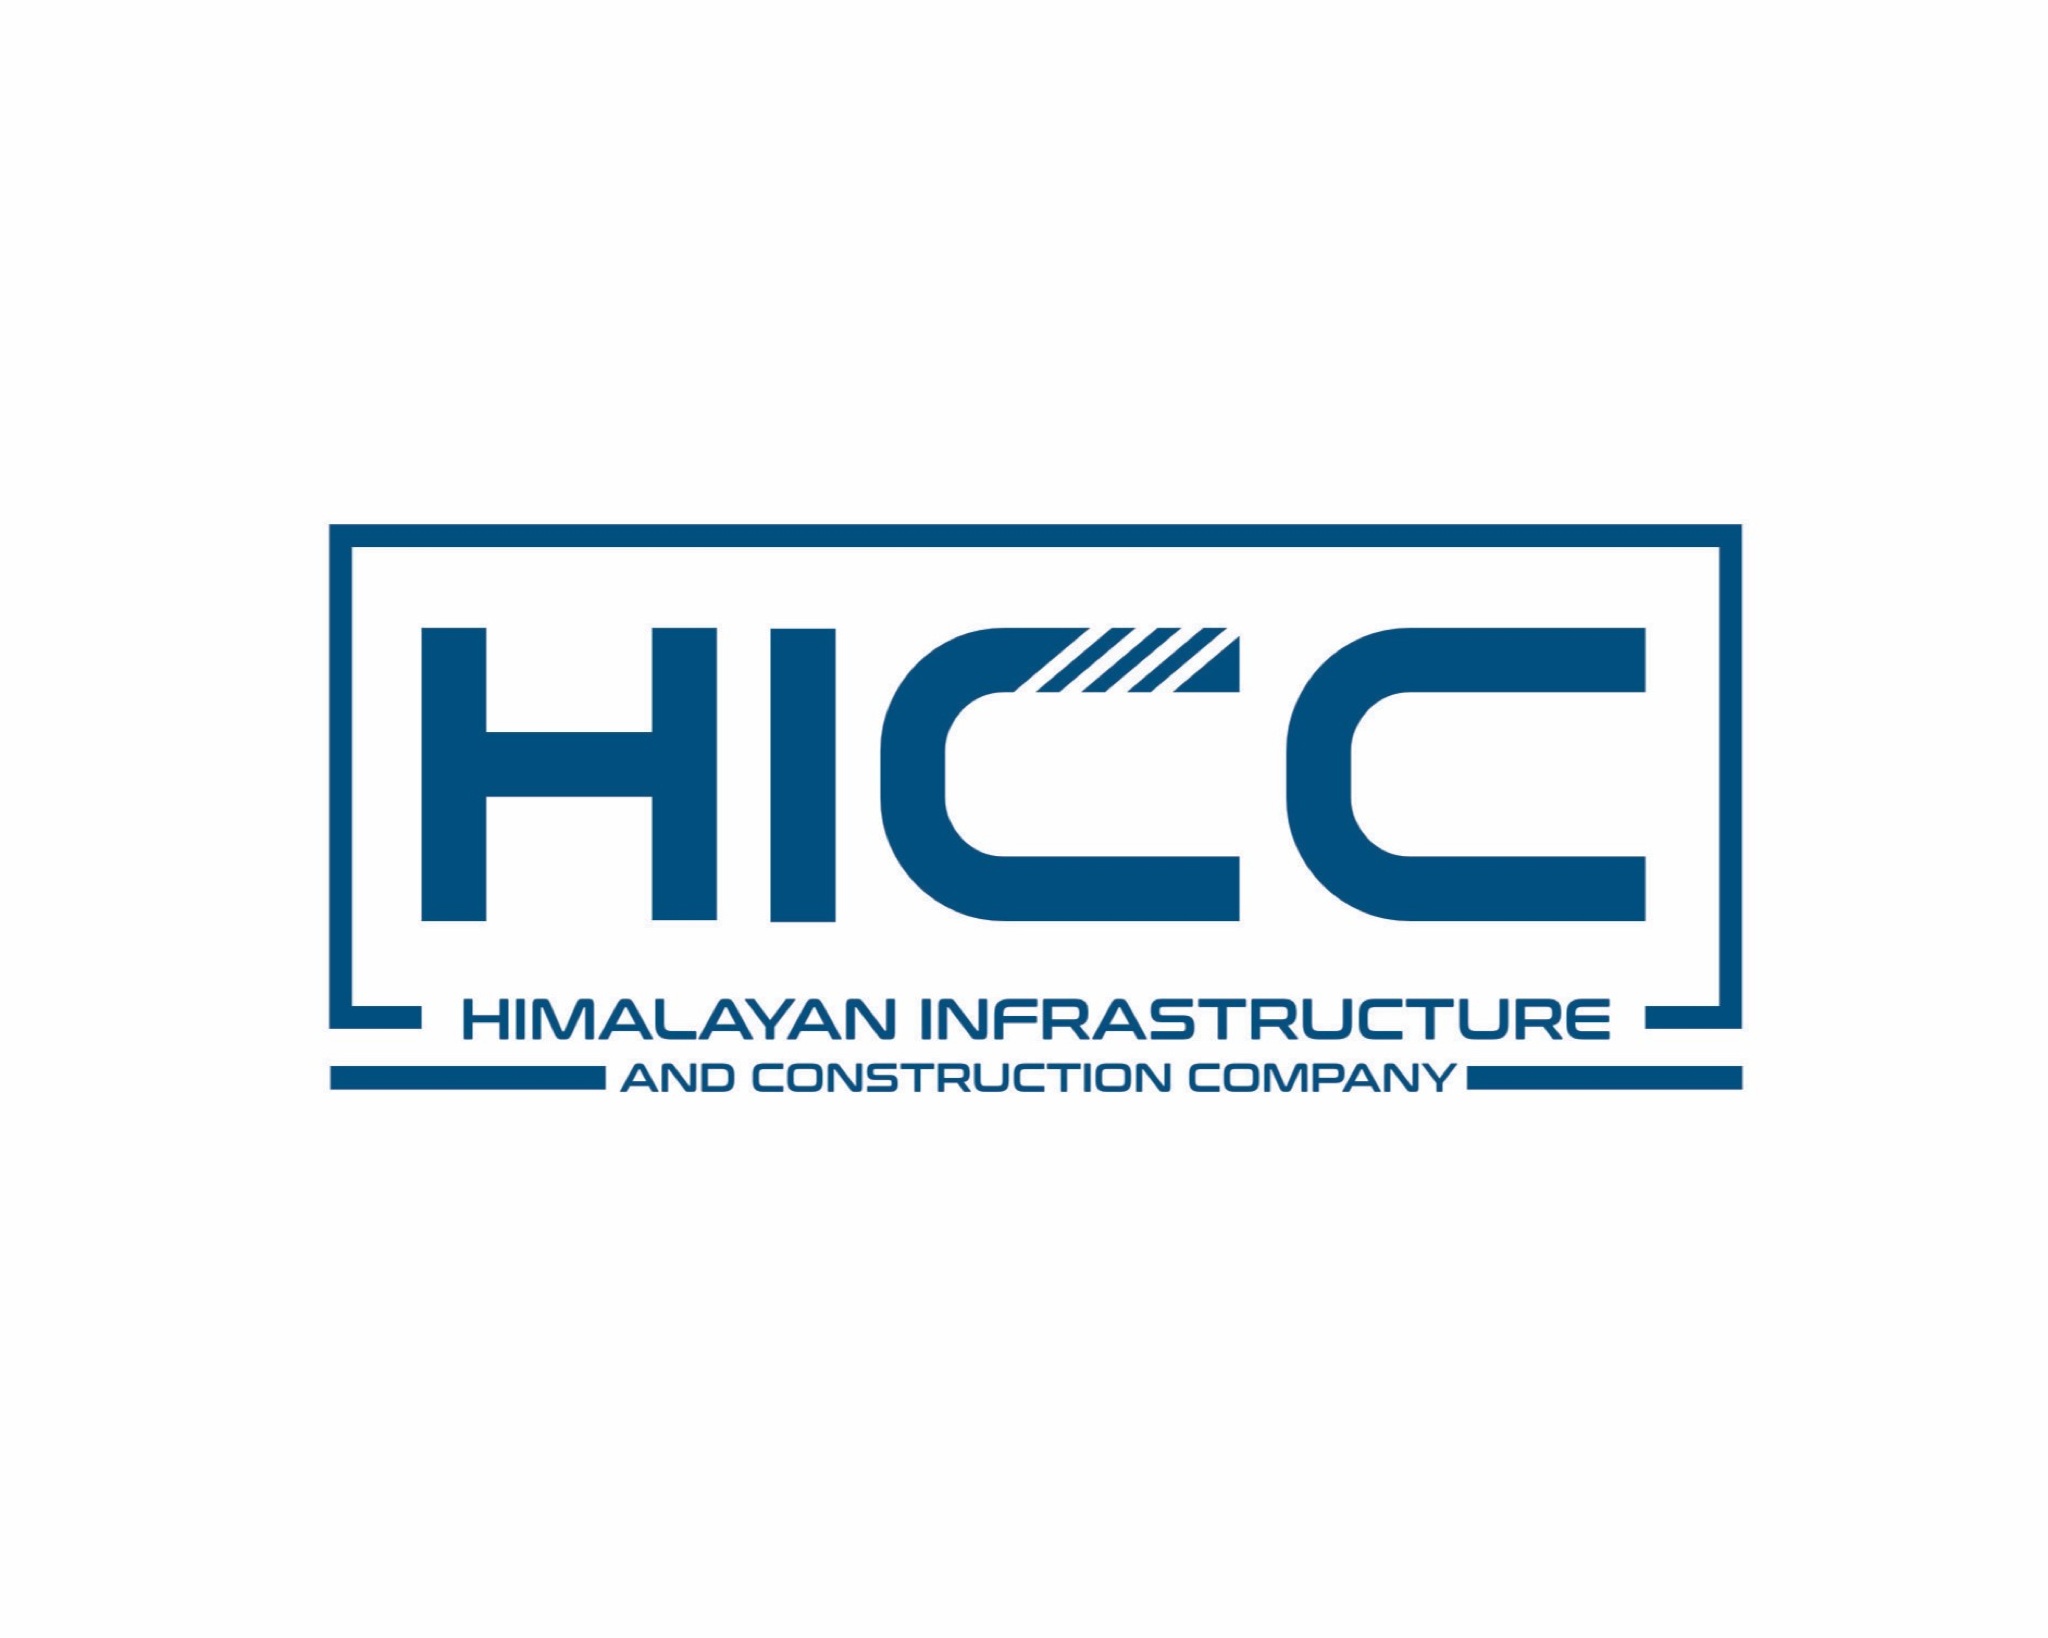 himalayan-infrastructure-and-construction-company-hicc